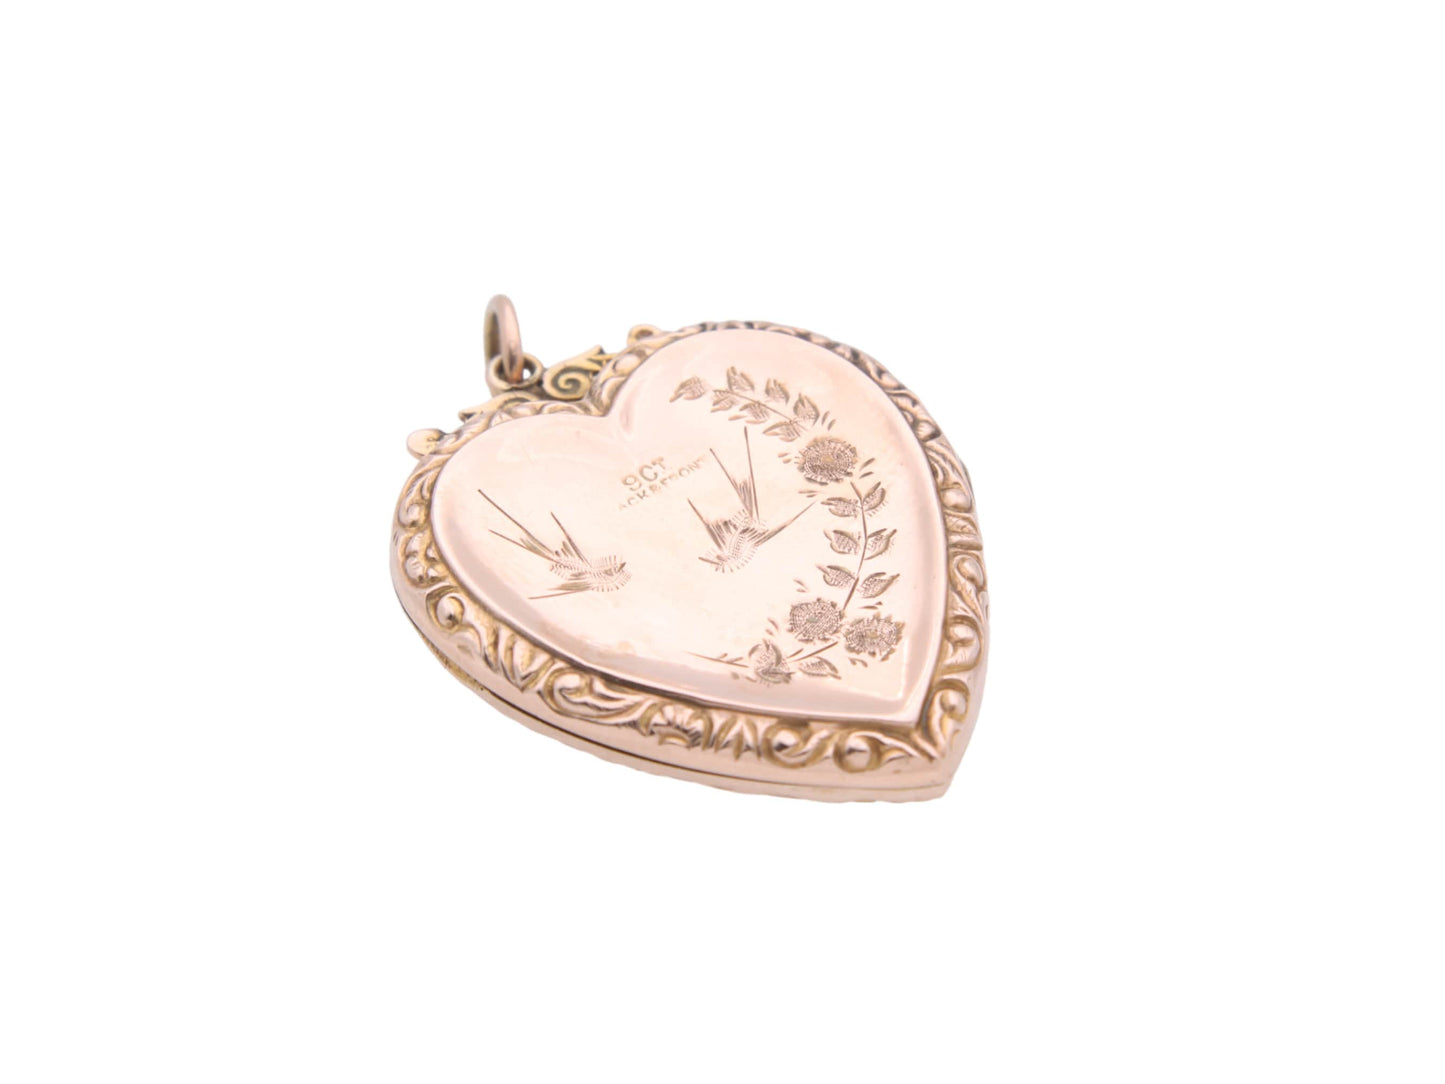 Antique 9ct Gold Large Decorative Heart Shaped Swallow Locket